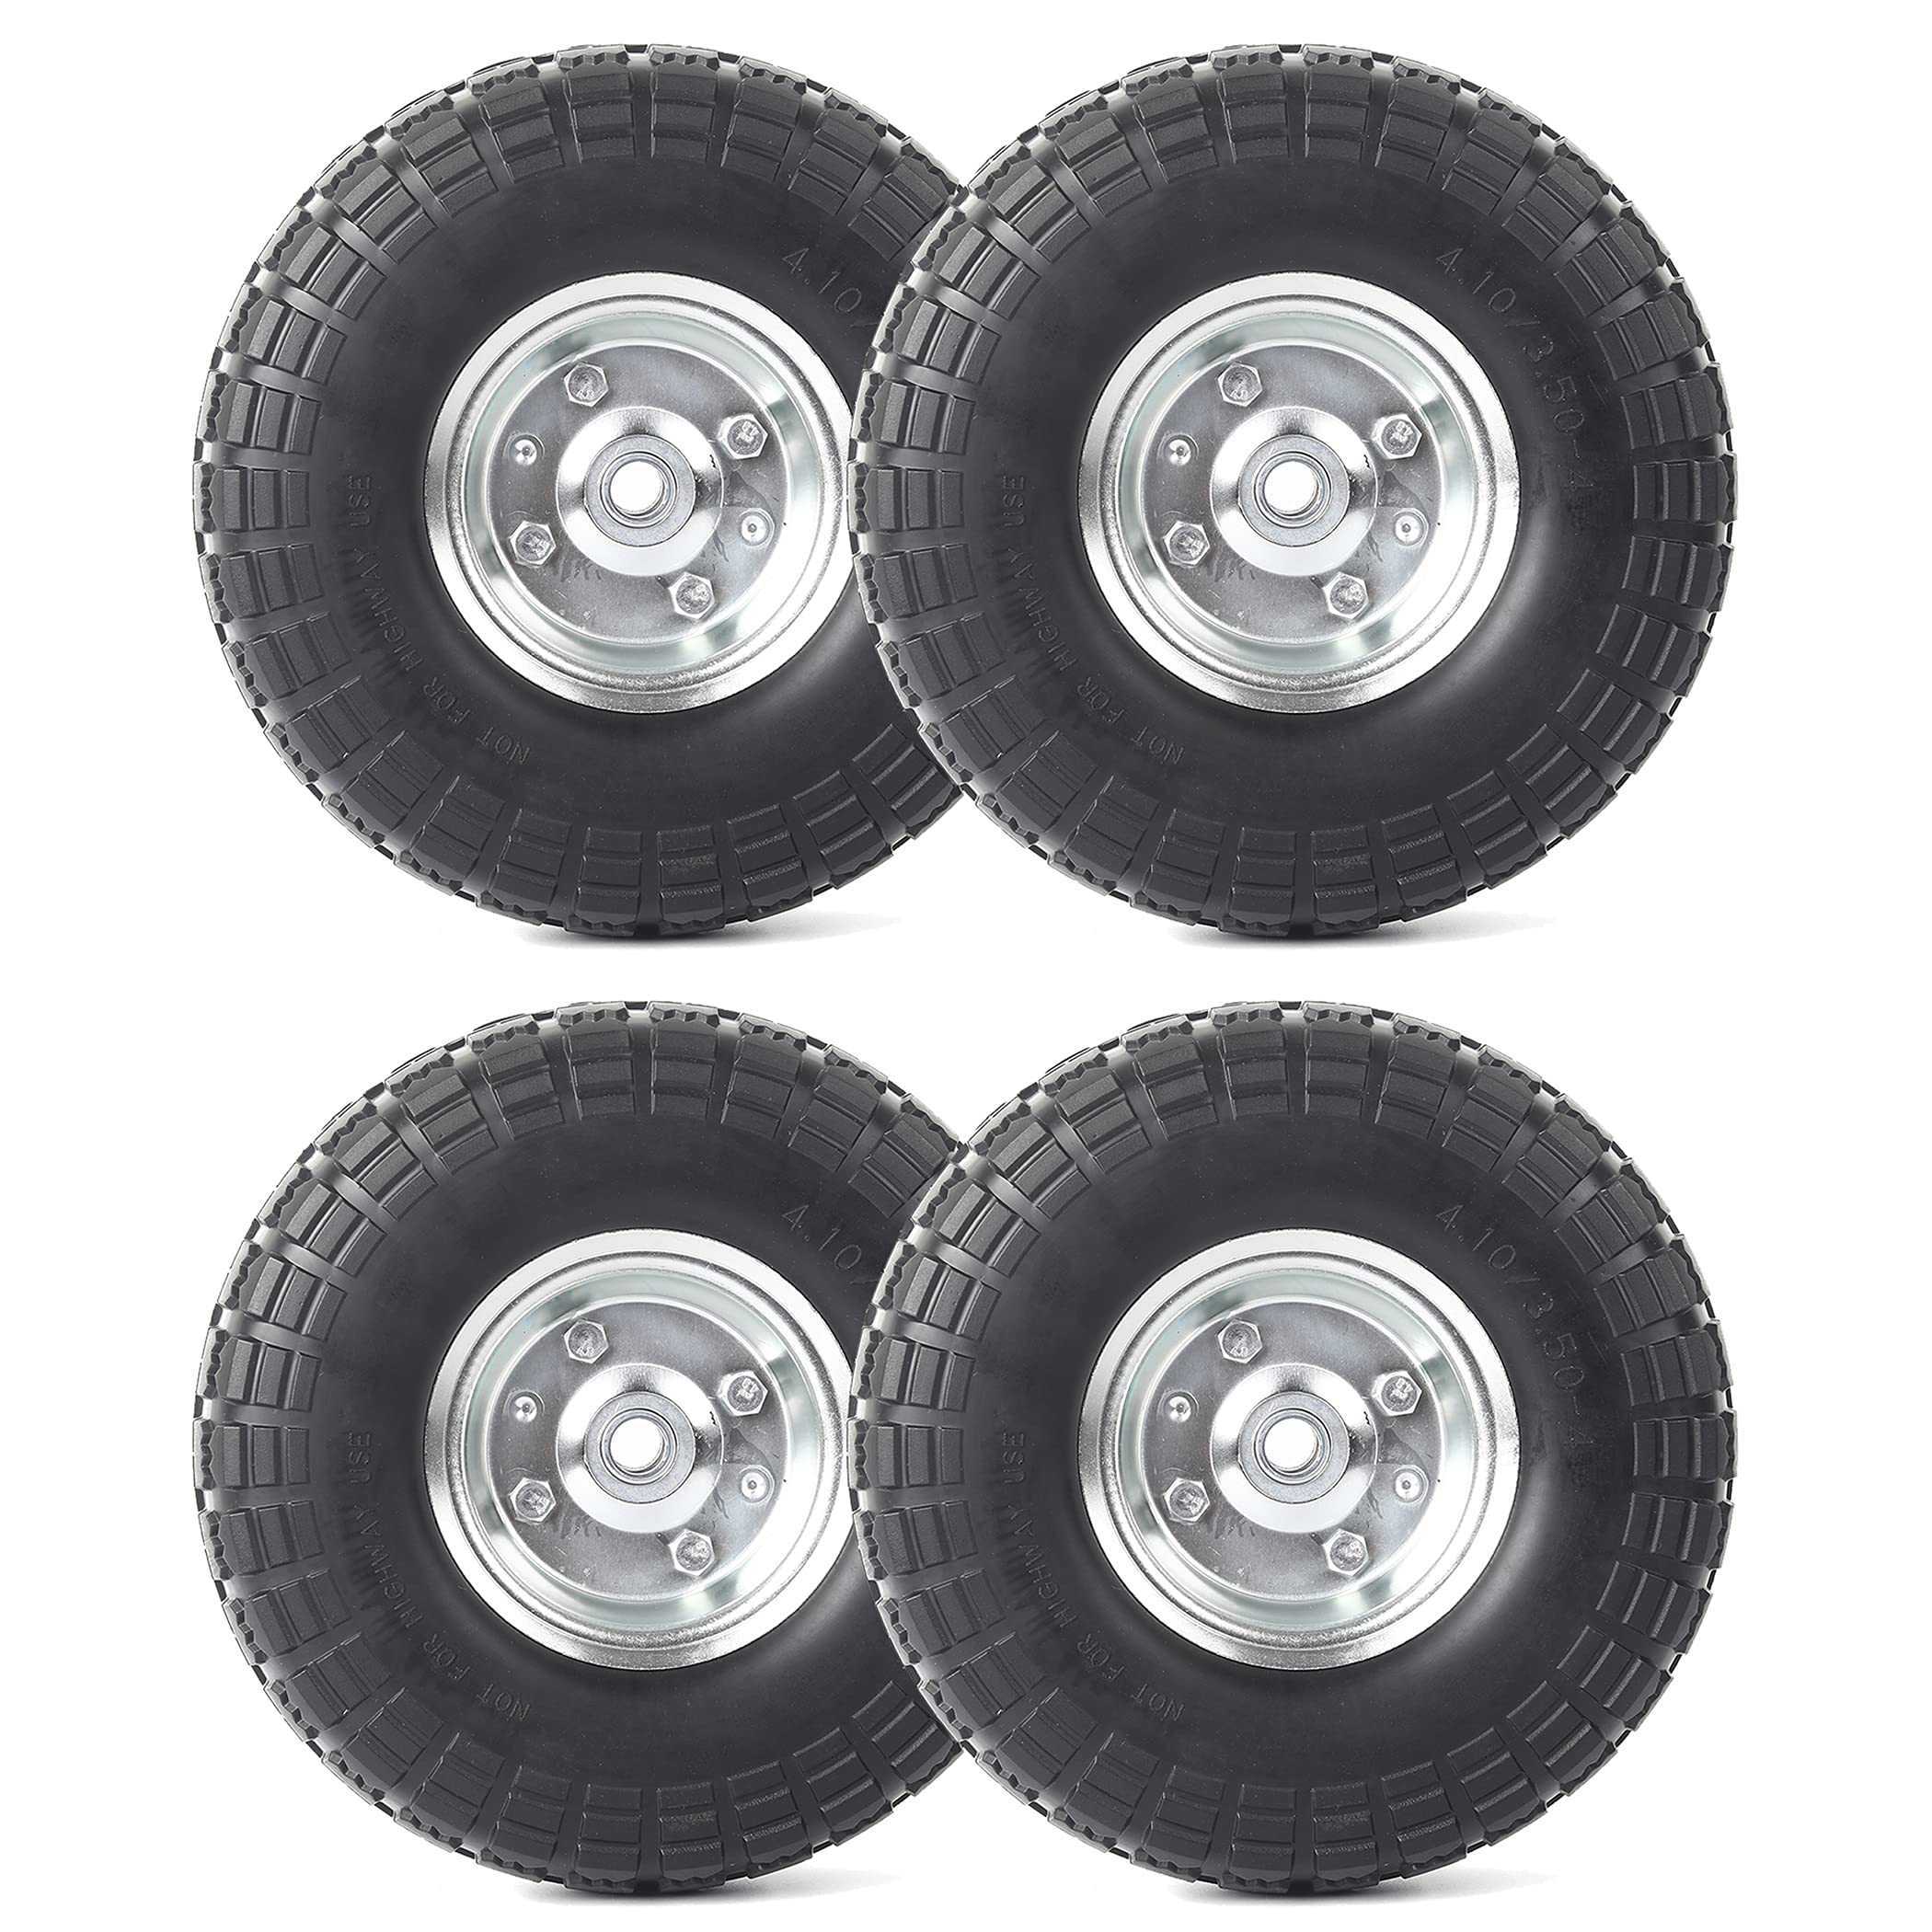 AR-PRO Solid Rubber Tires and Wheels